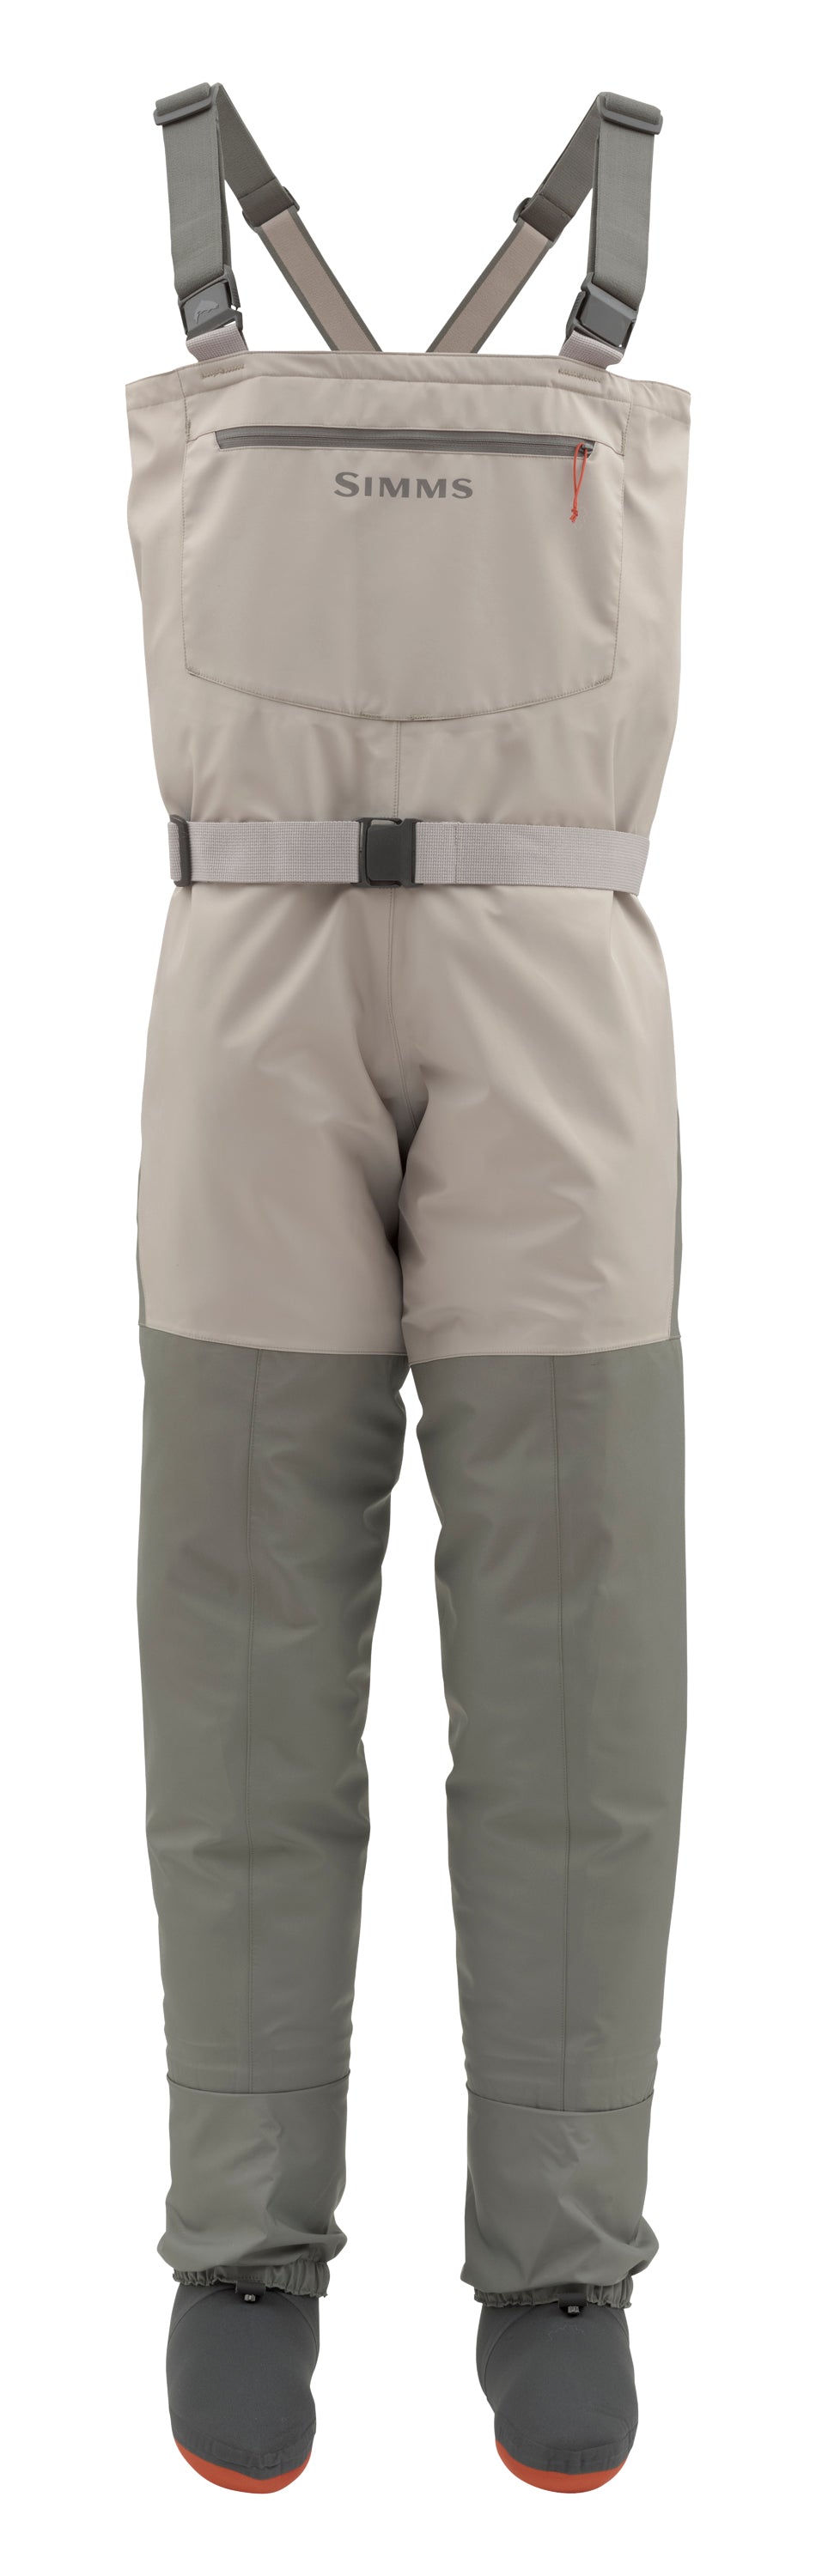 Simms W's Tributary Stockingfoot Wader – The Confluence Fly Shop